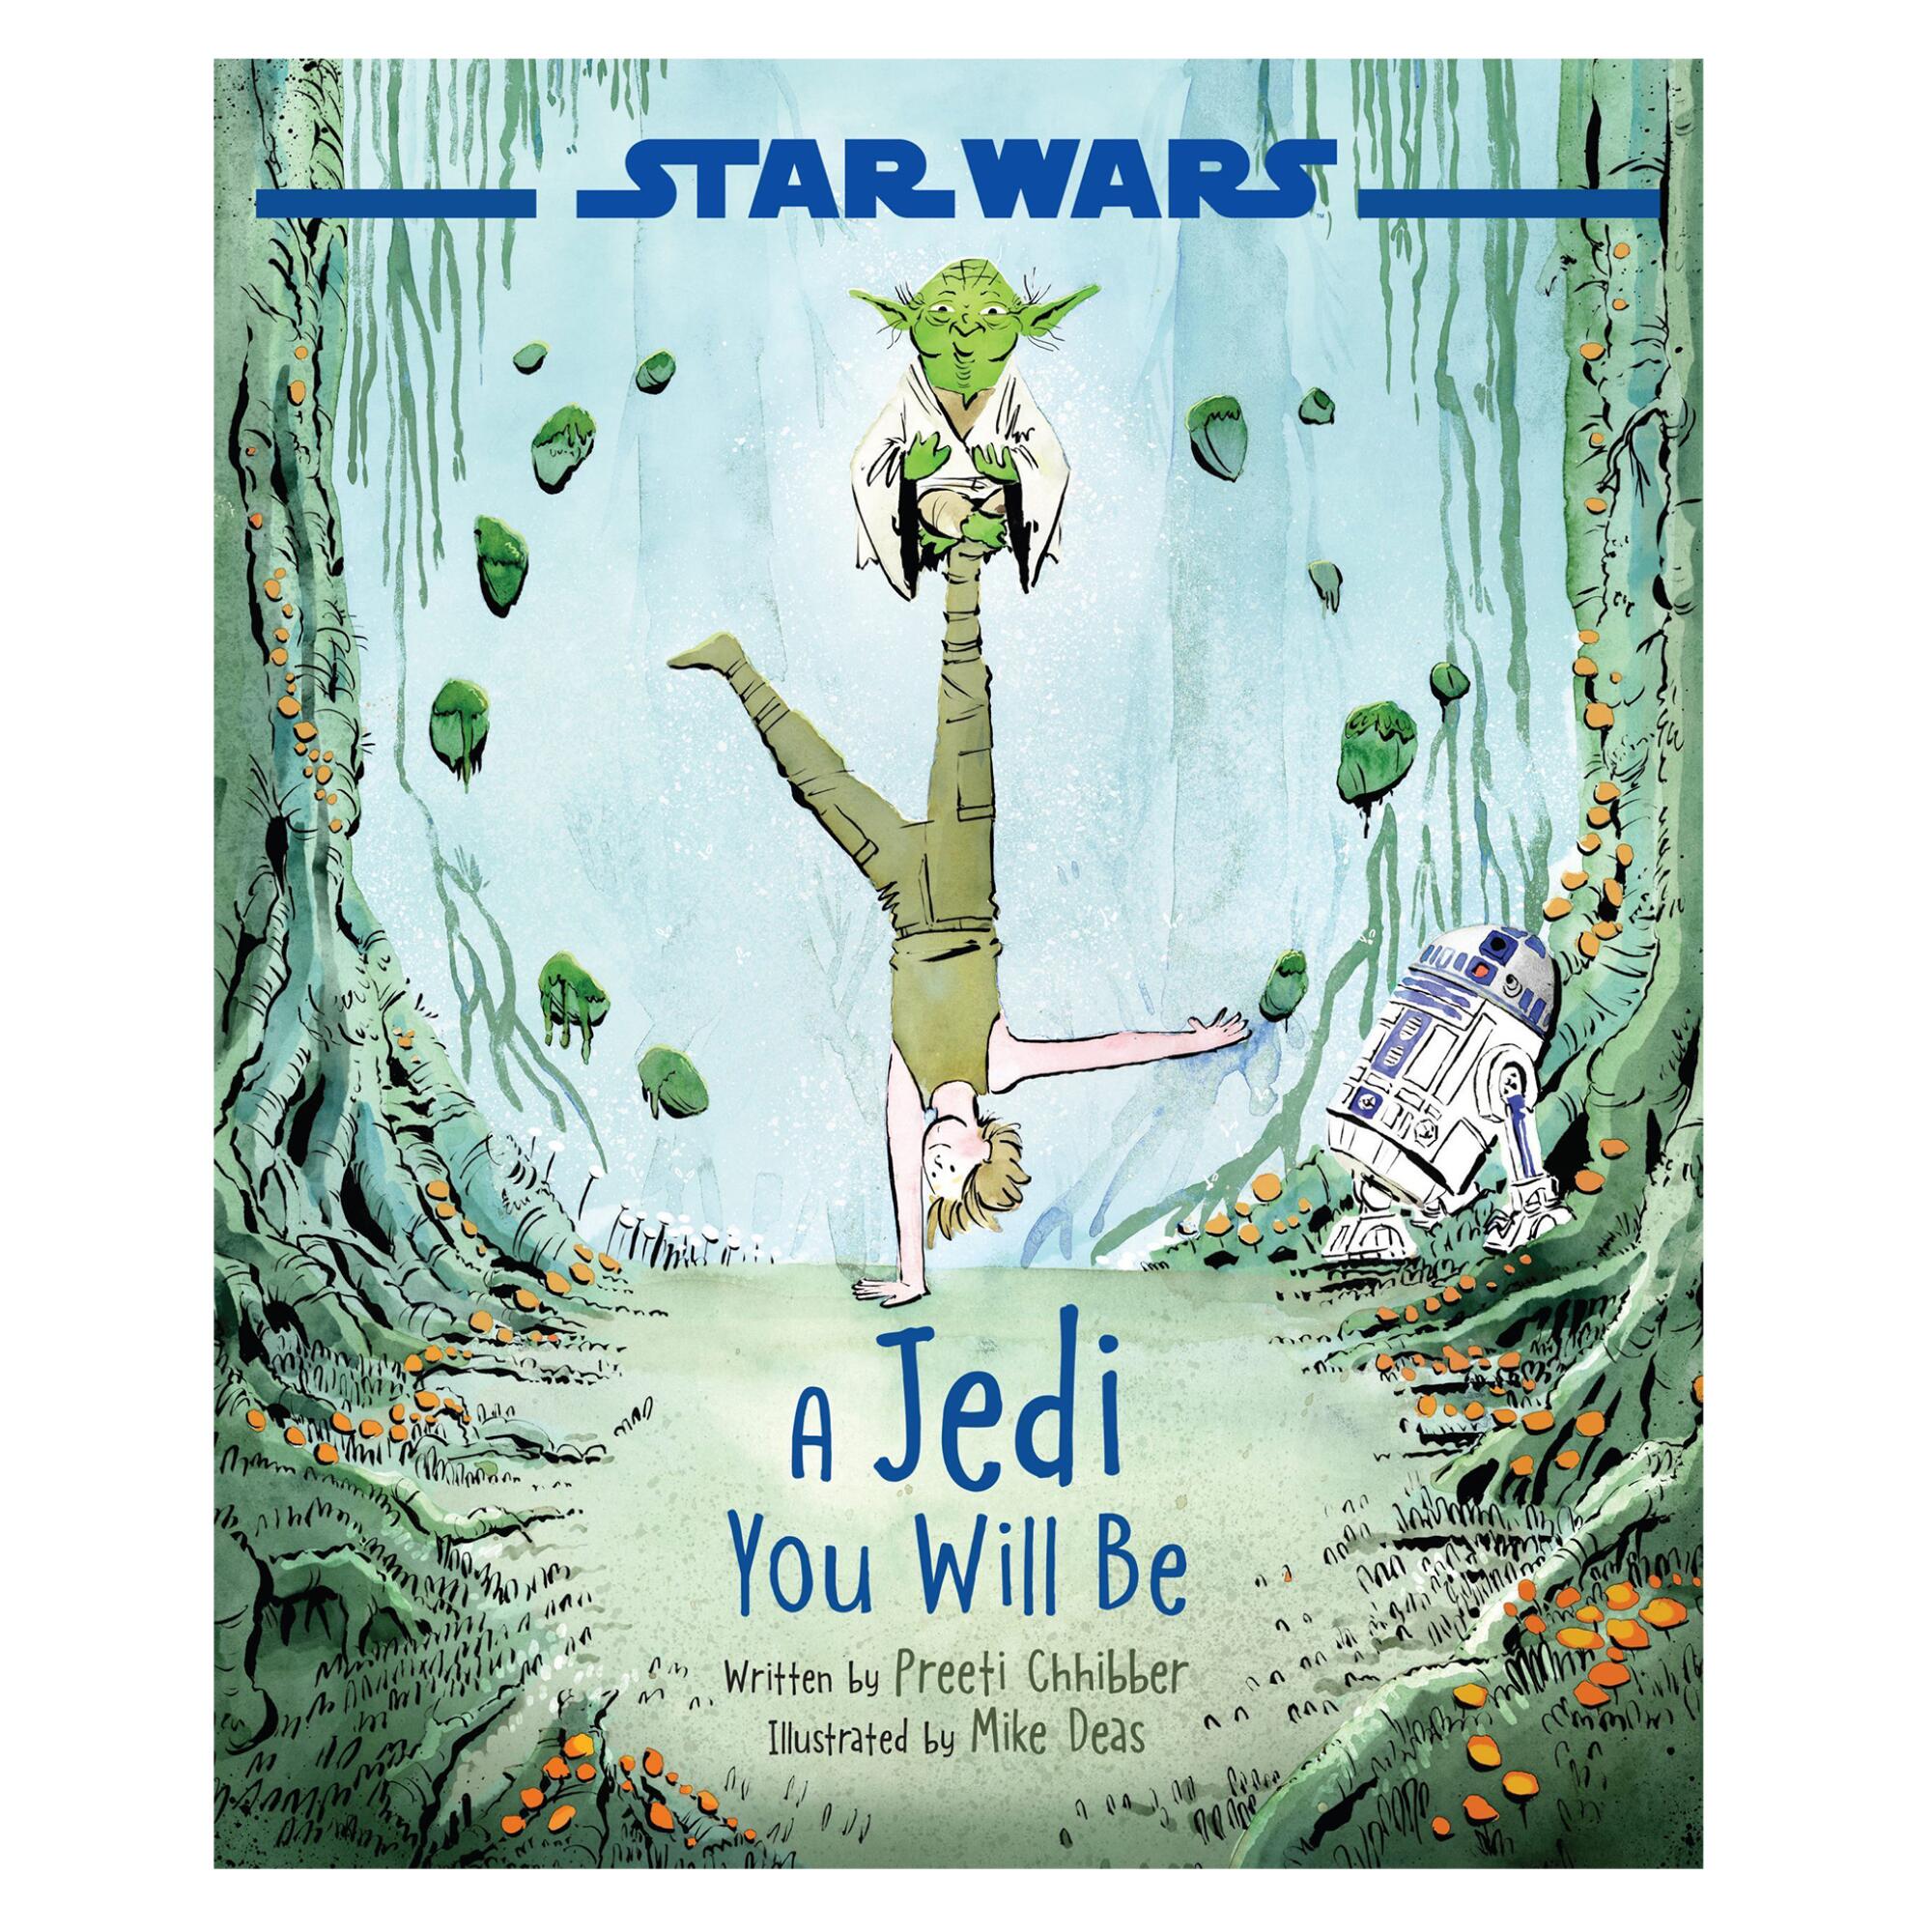 Star Wars A Jedi You Will Be written by Preeti Chhibber and Illustrated by Mike Deas.